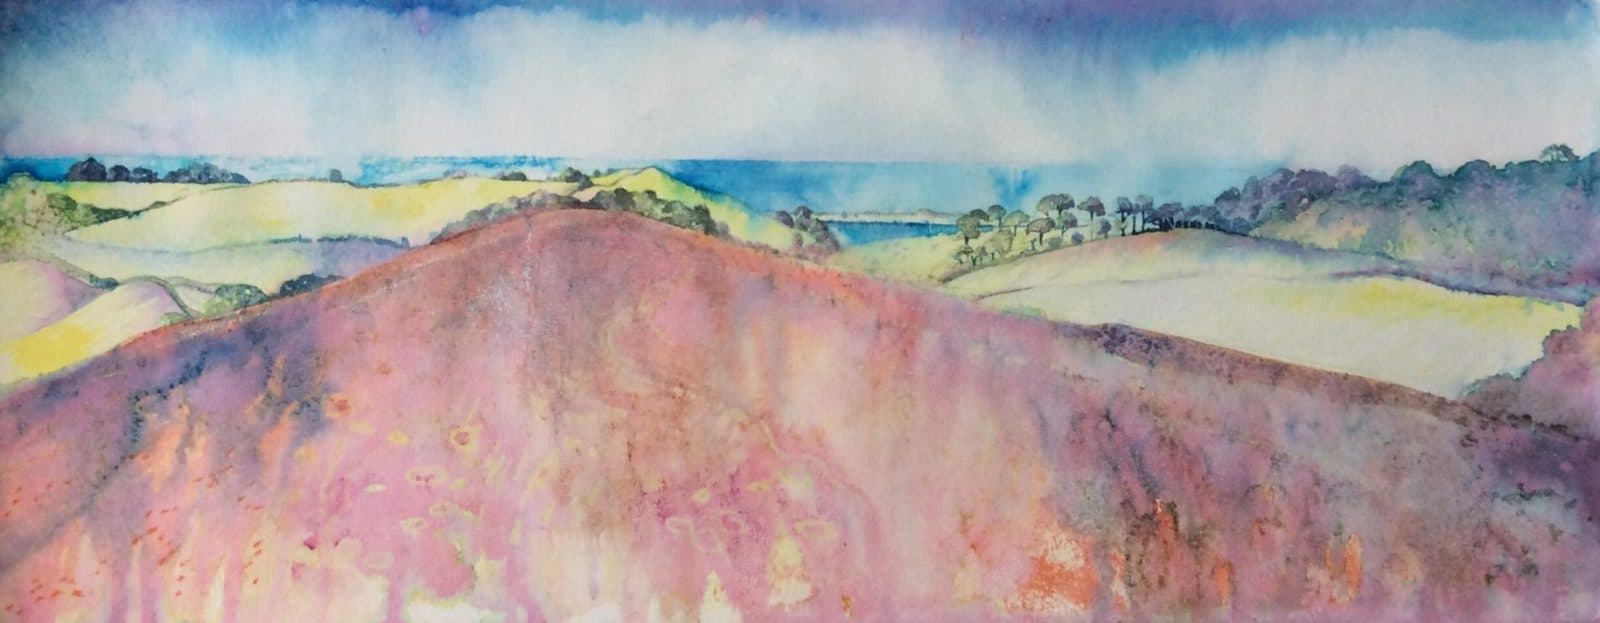 Watercolour painting by Hilary Gibson